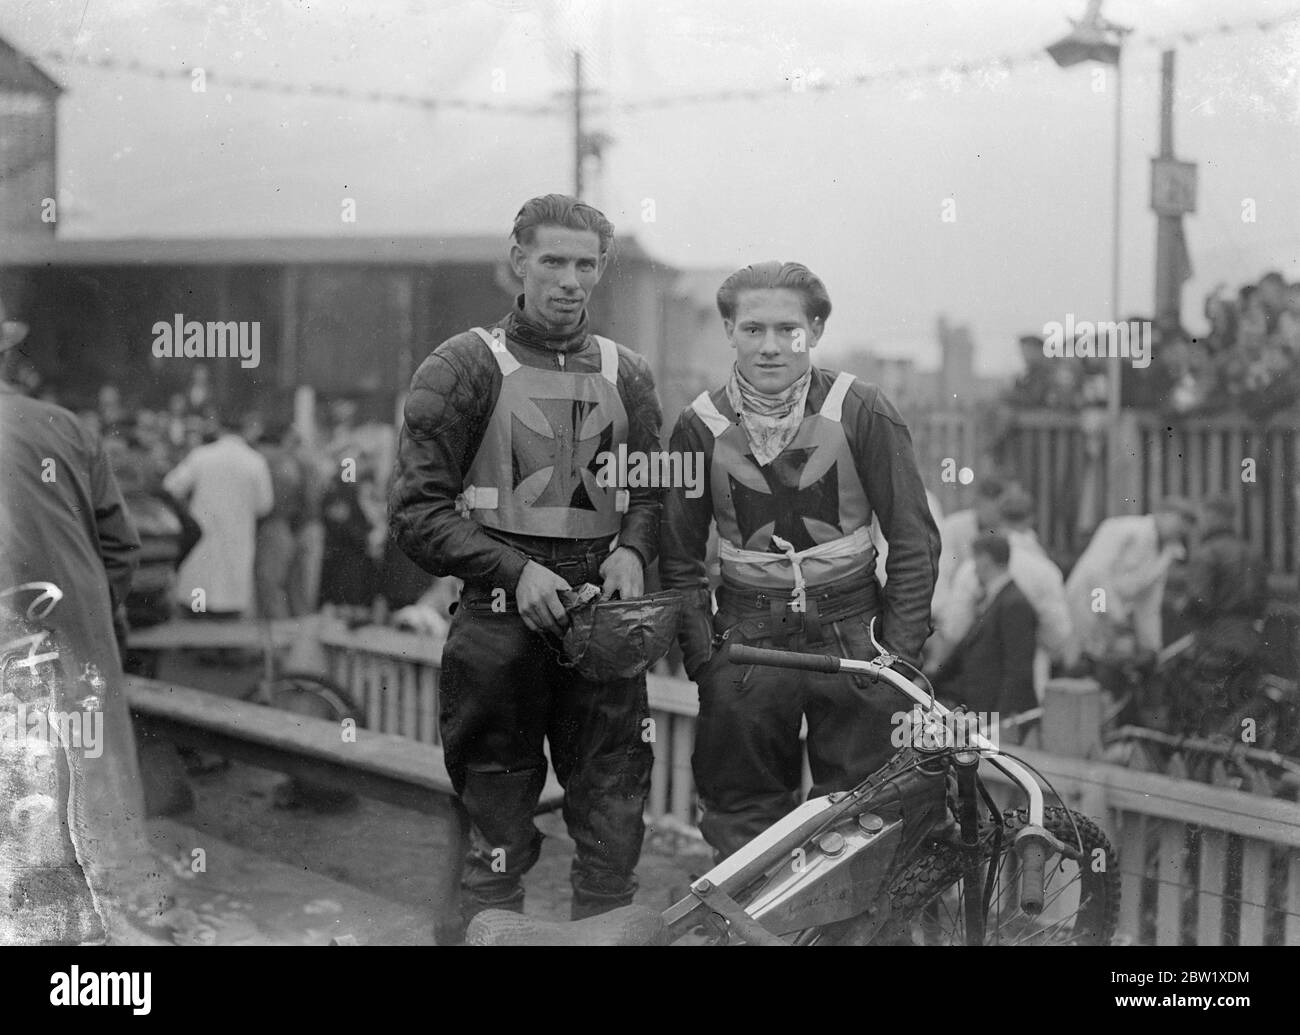 Speedway riders: American Jack Milne (left) and Britain's George Newton, New Cross Rangers at New Cross Speedway Stadium. 26 May 1937 [?] Stock Photo